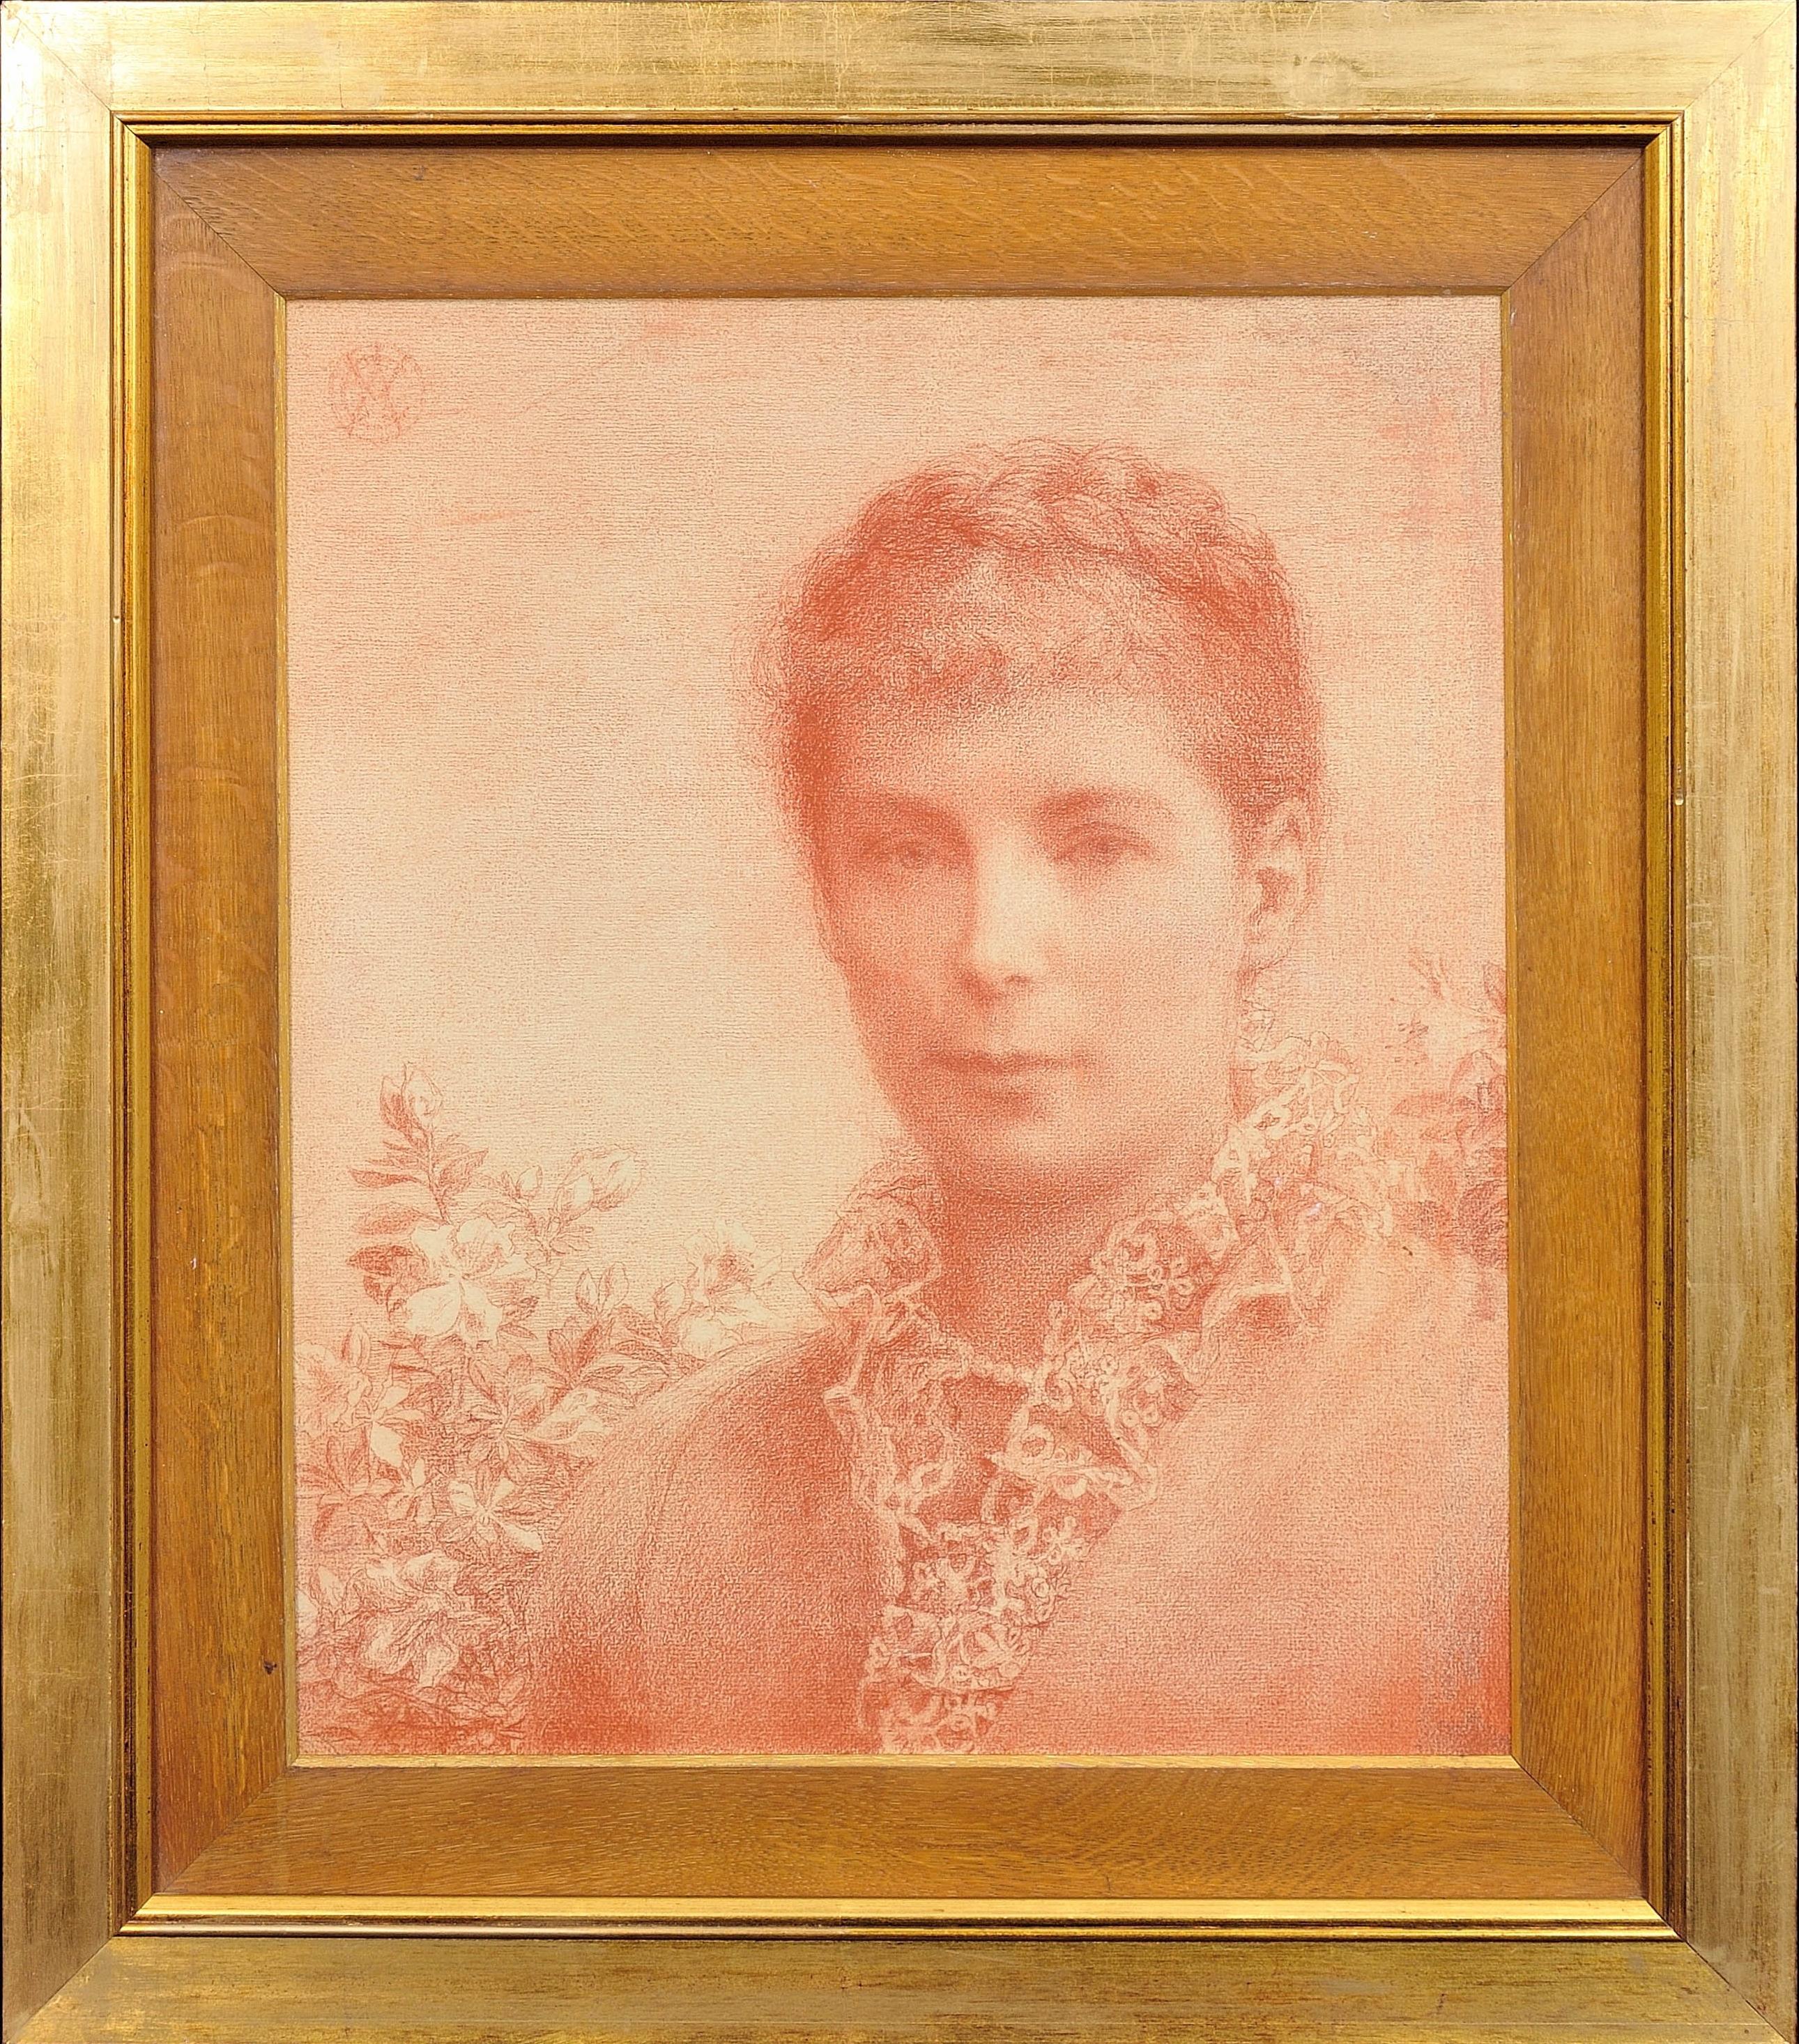 Alice Mary Chambers Portrait - Aesthetic Phase Pre-Raphaelite Movement Late 19th Century. Sanguine Red Chalk